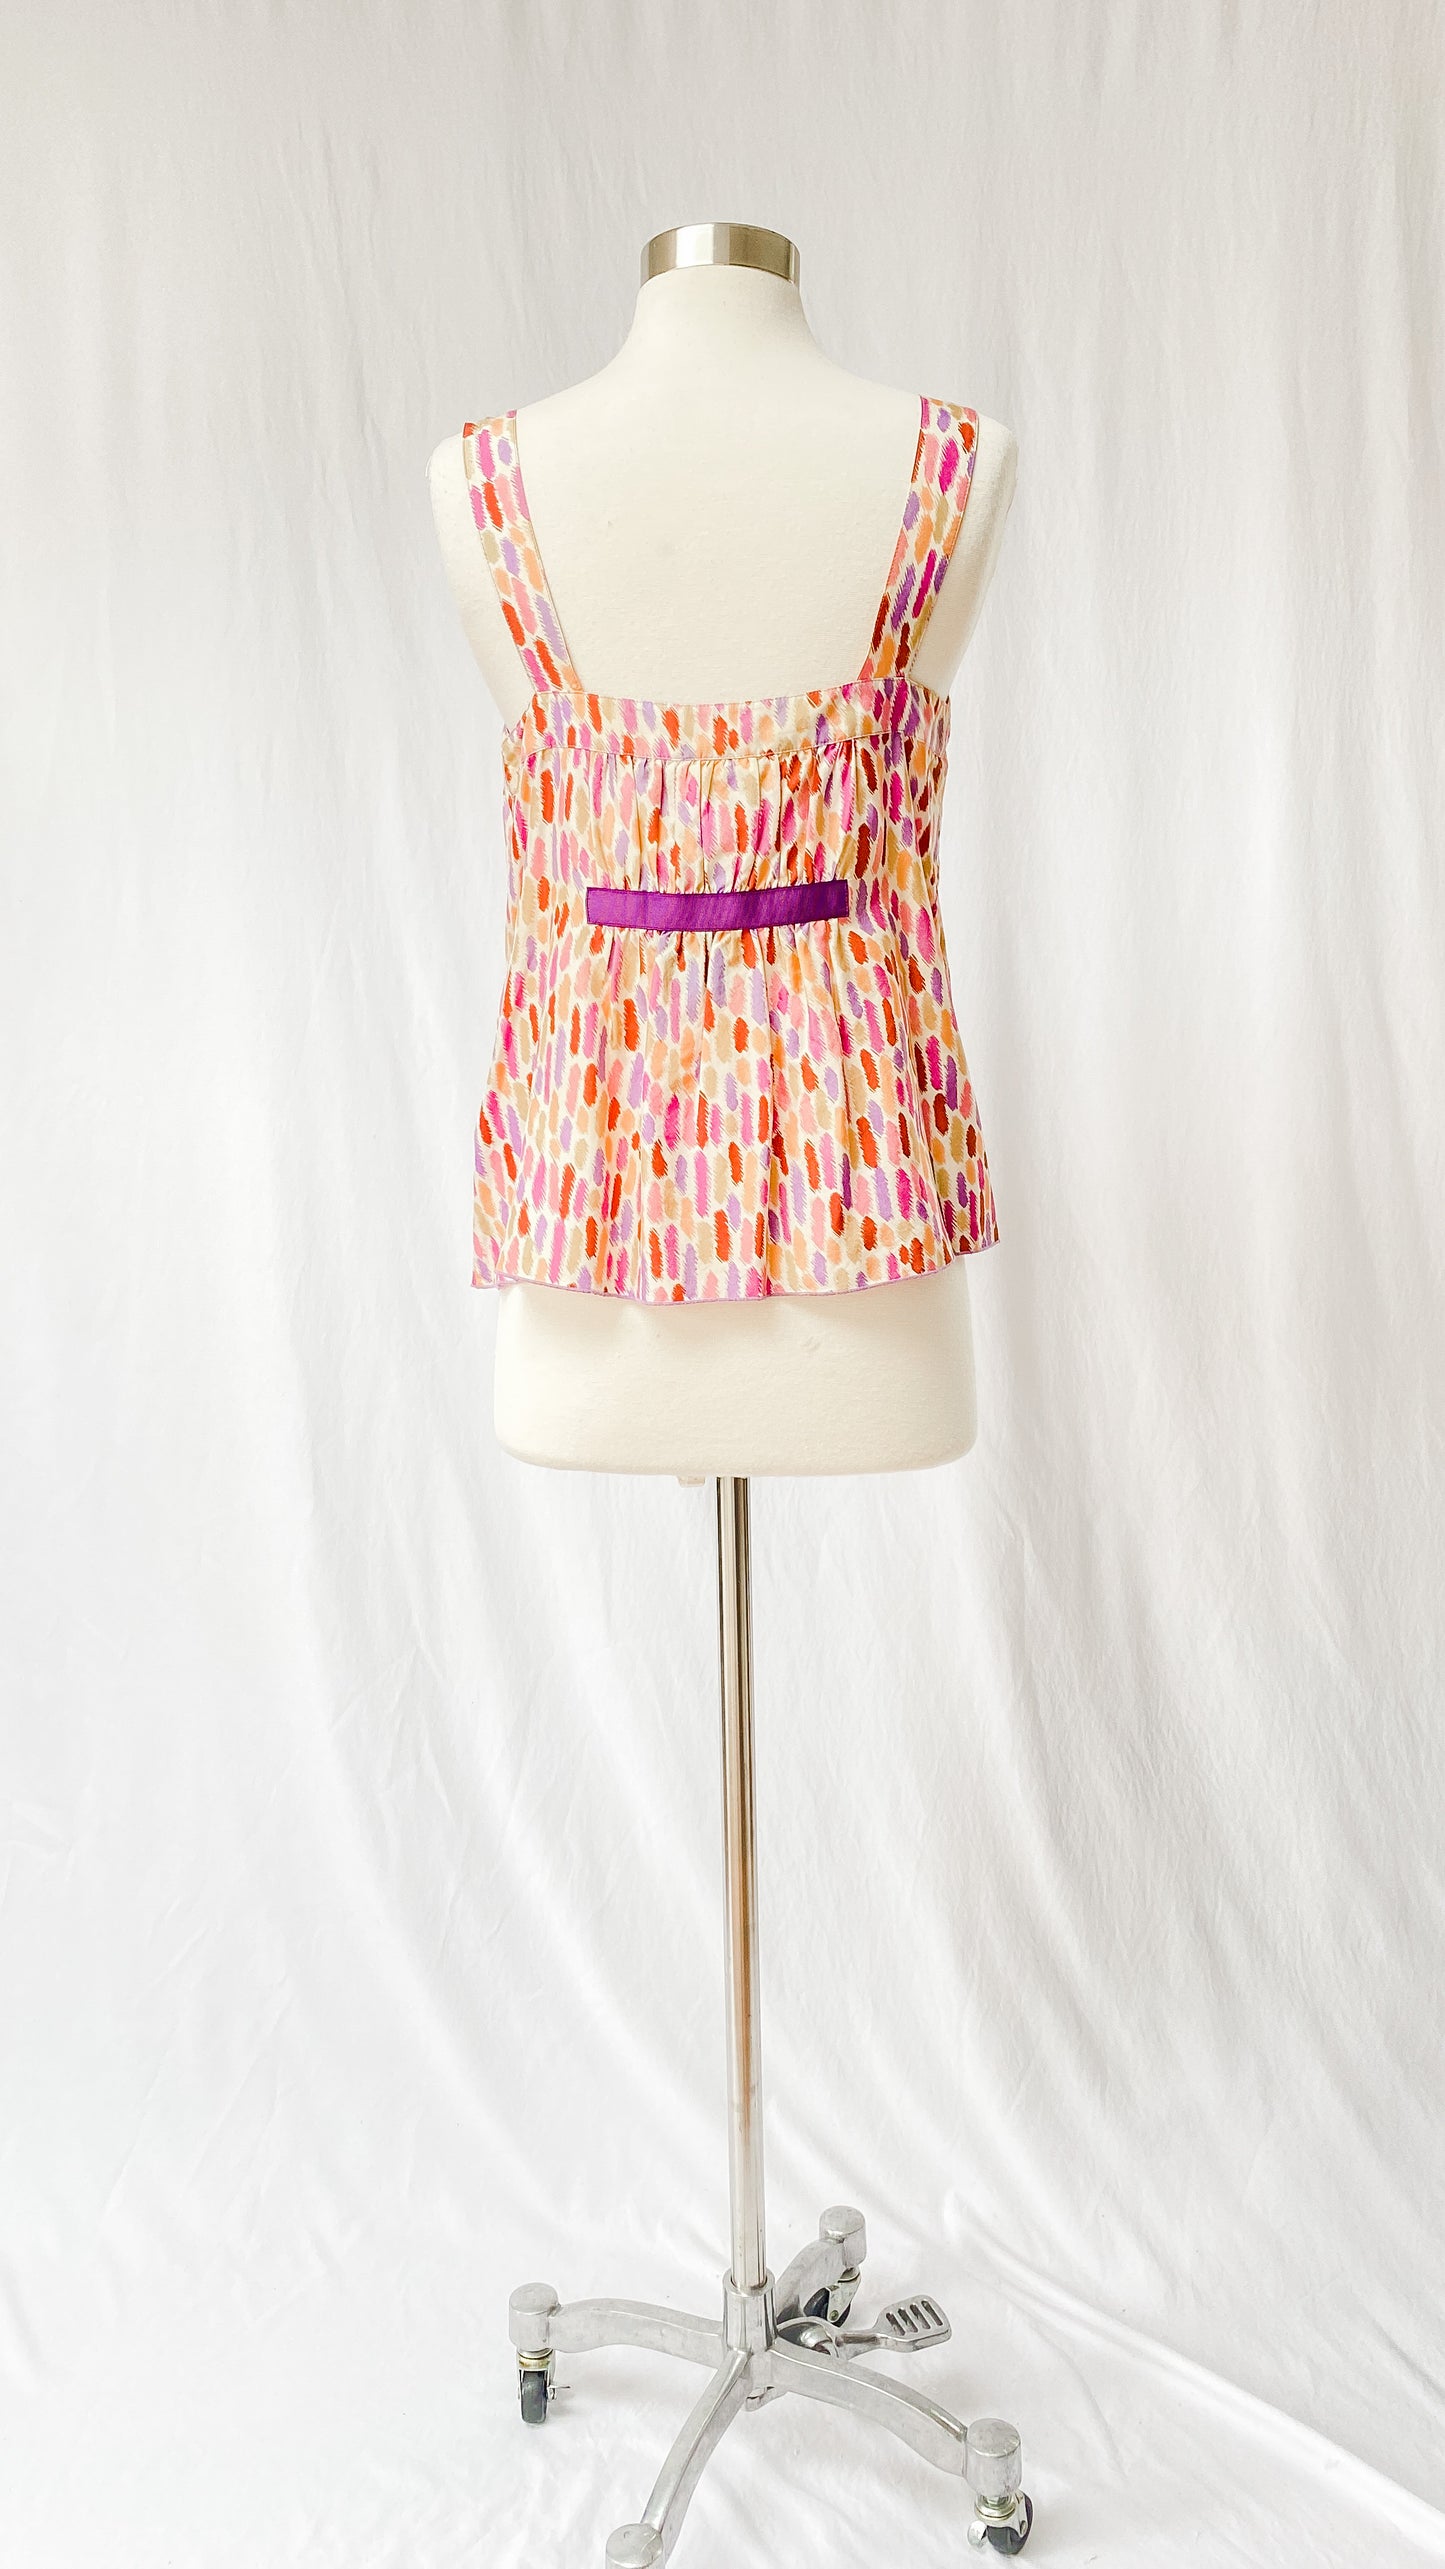 Anna Sui for Anthropologie Silk Print Sleeveless Top